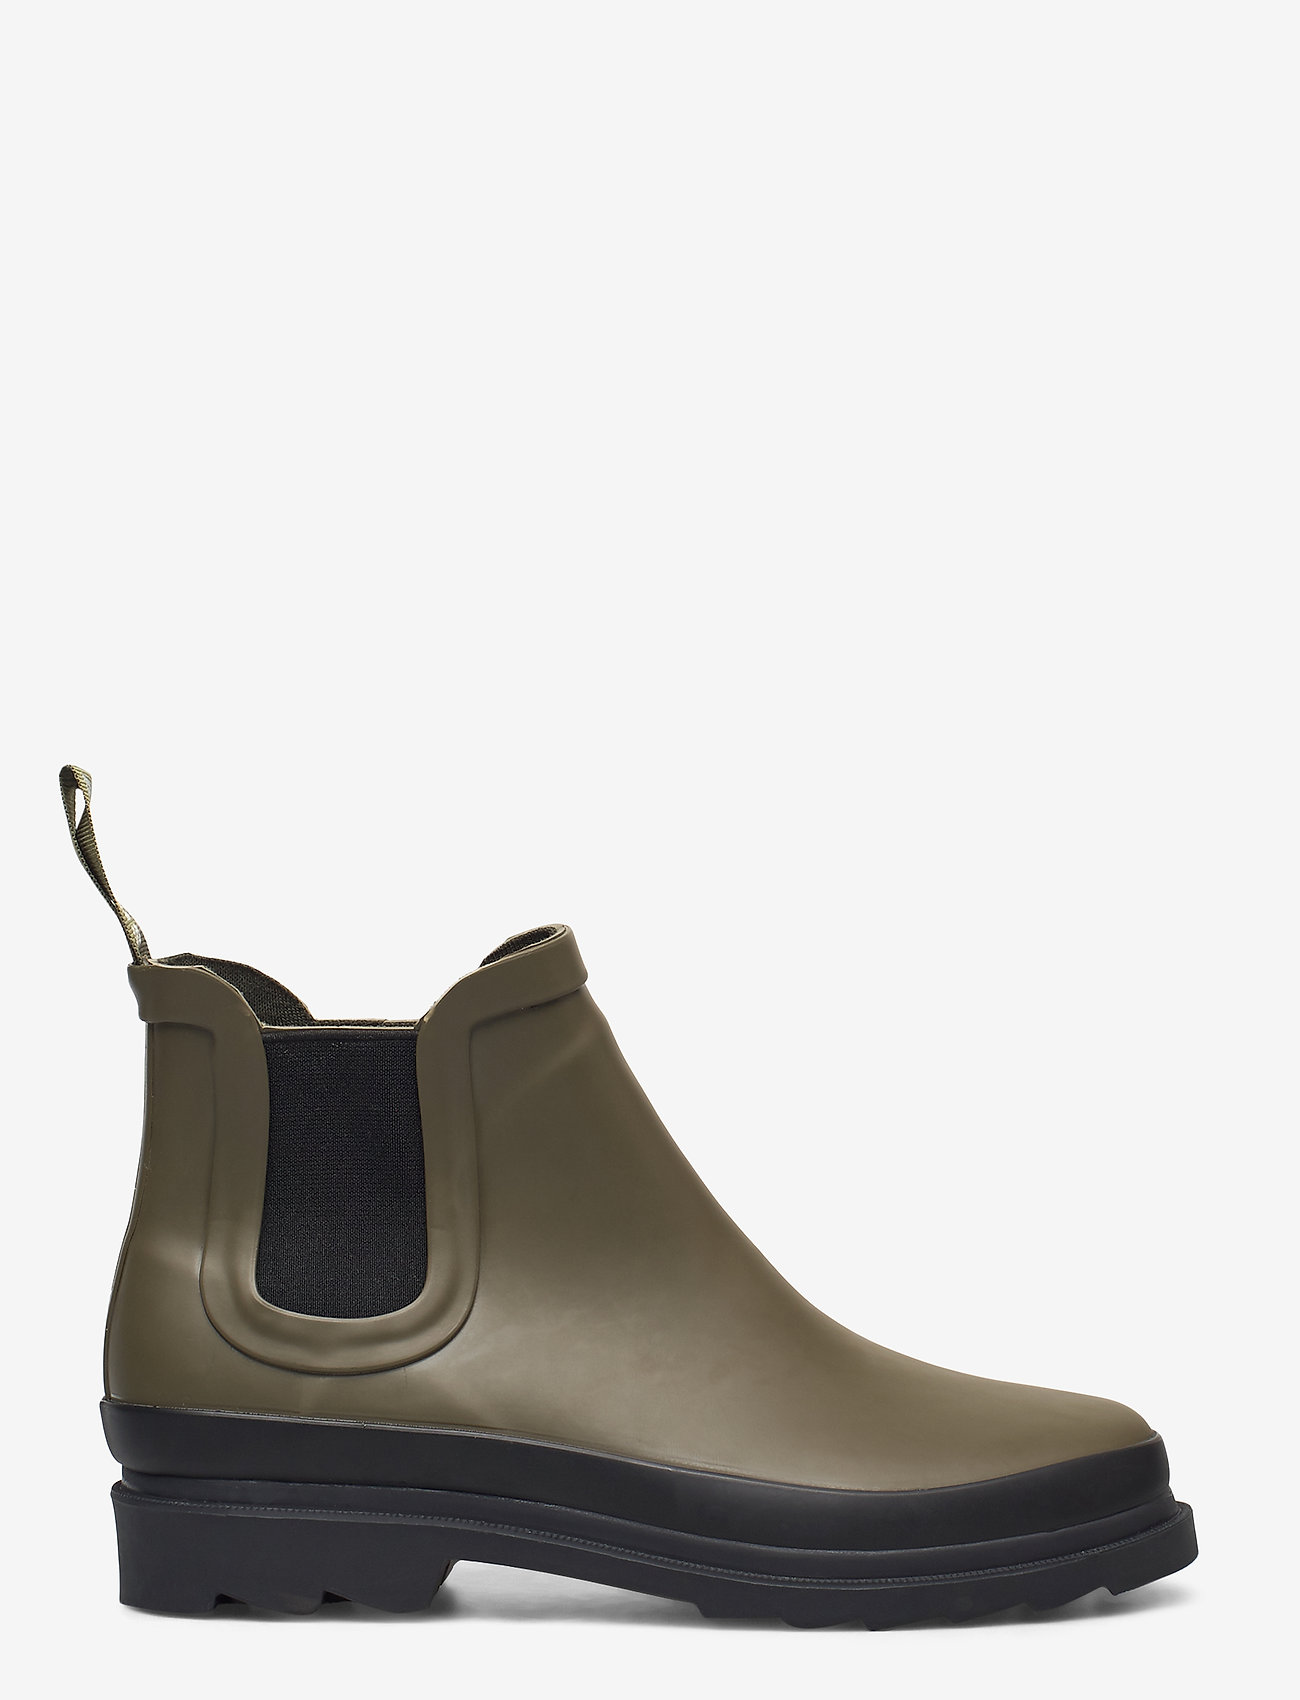 ANGULUS - Rain boots - low with elastic - naised - 0002 olive - 1